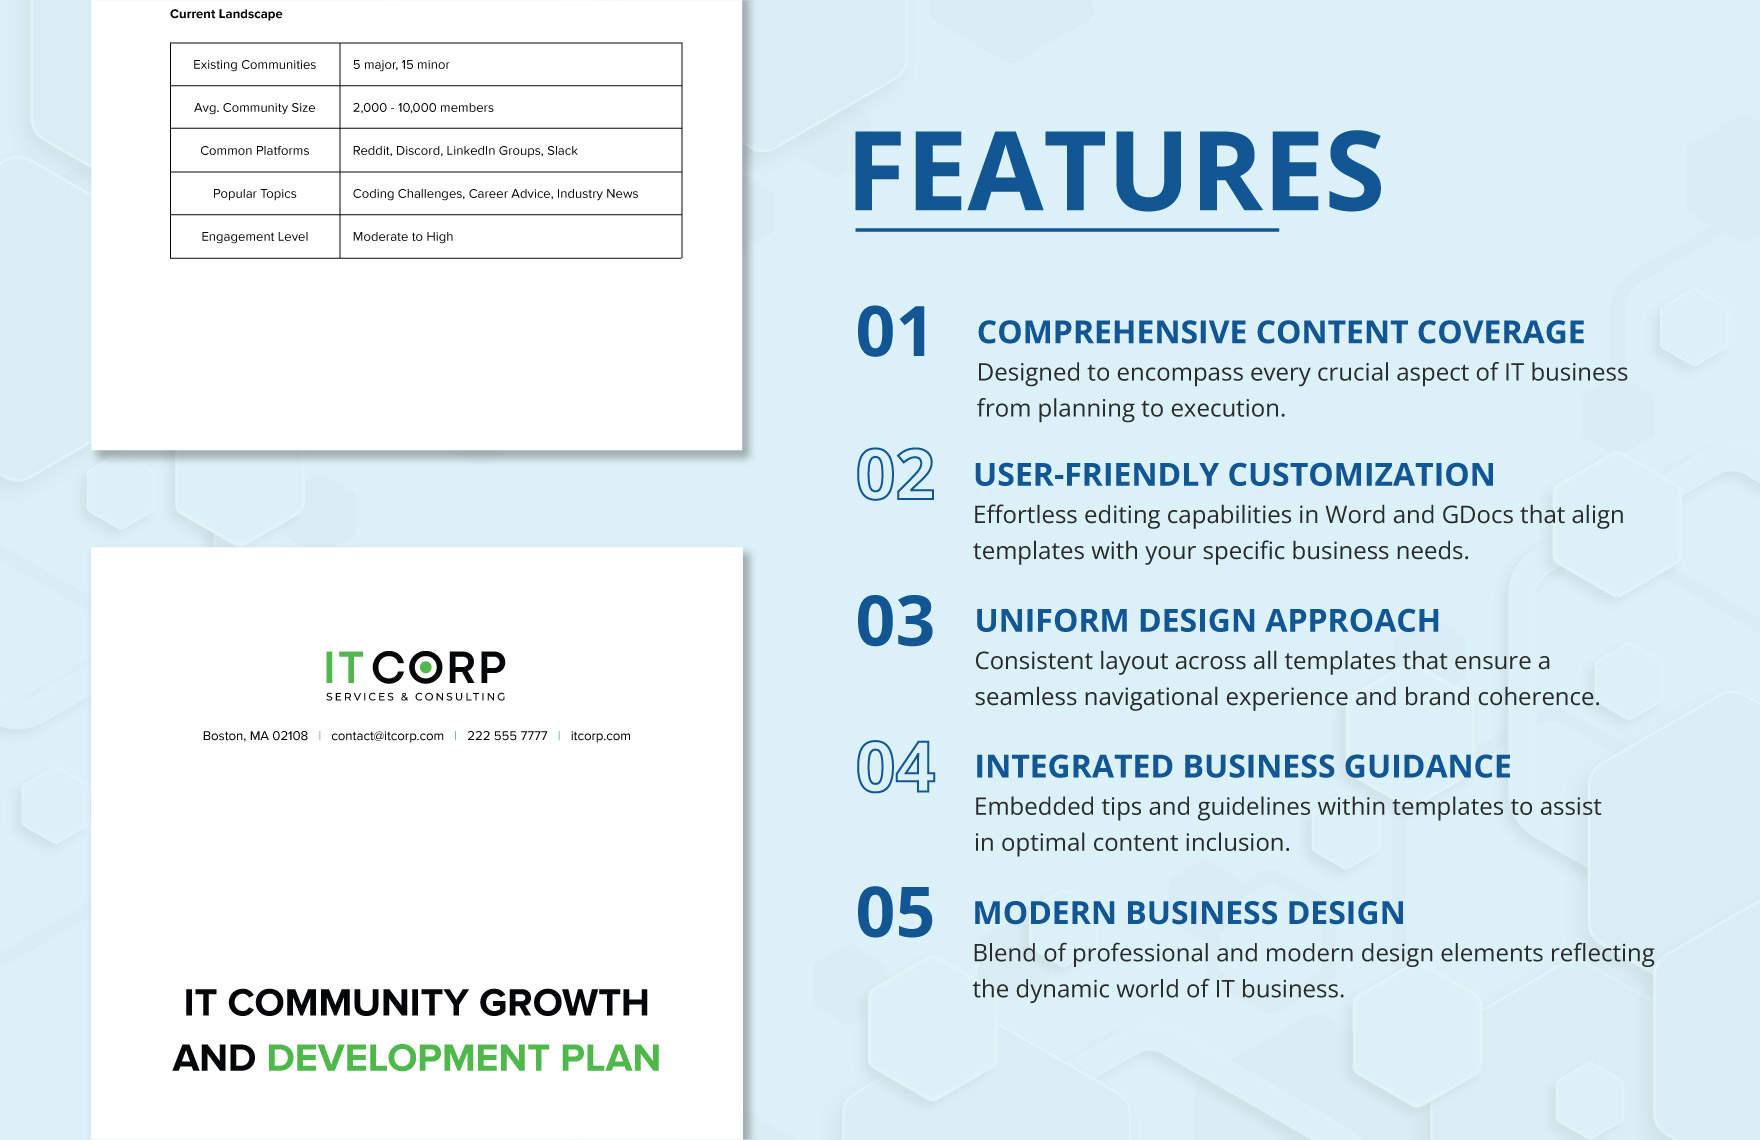 IT Community Growth and Development Plan Template